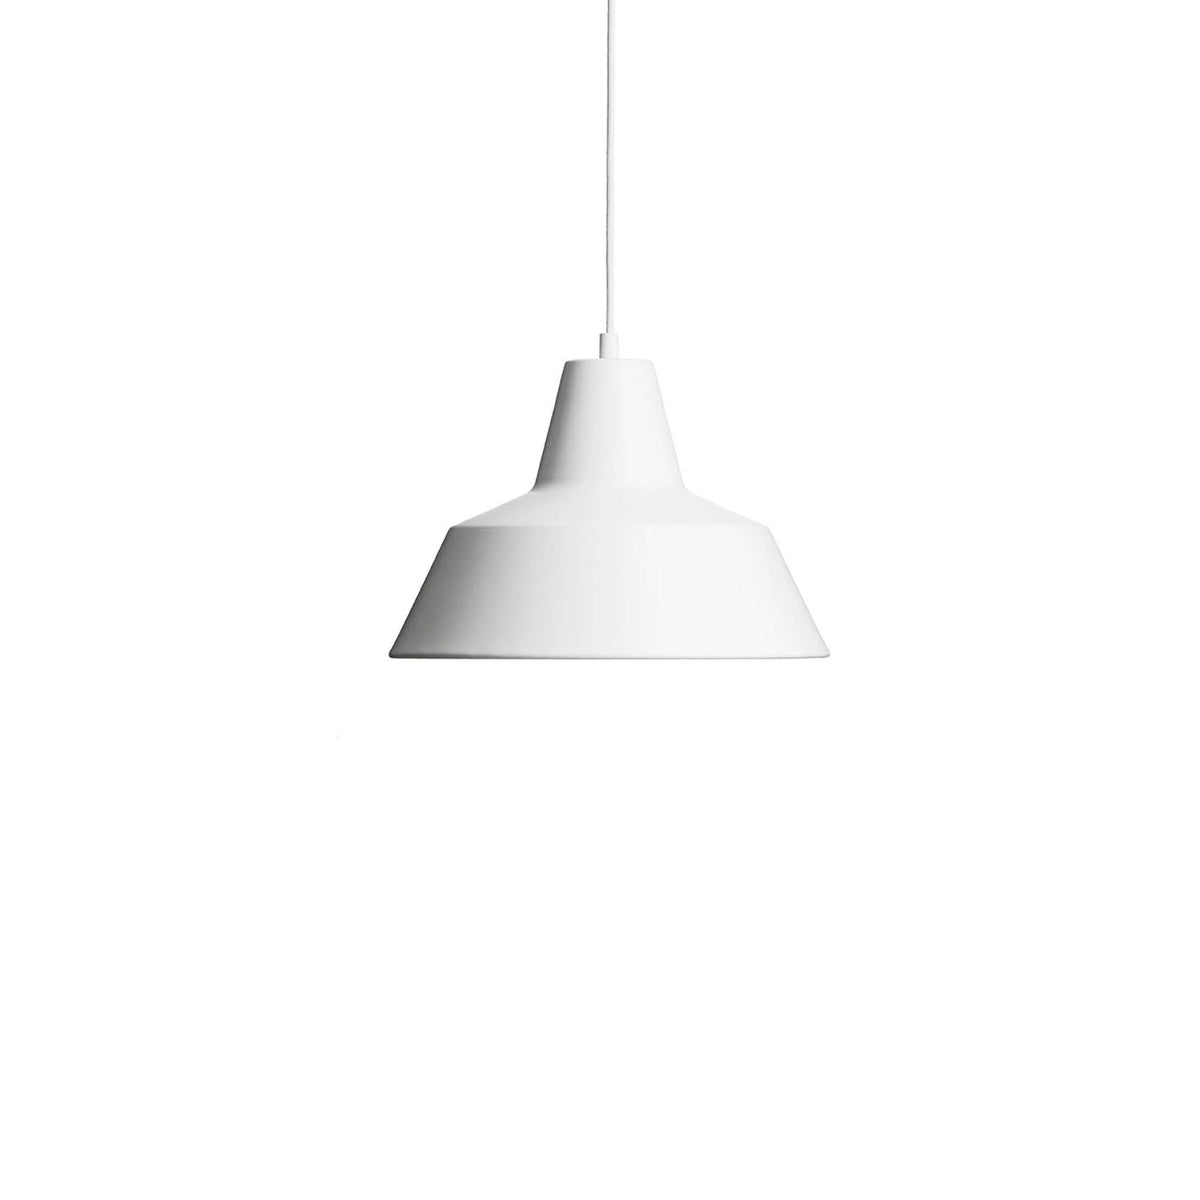 Made by Hand Workshop W3 Pendant in Matte White by A Wedel Madsen